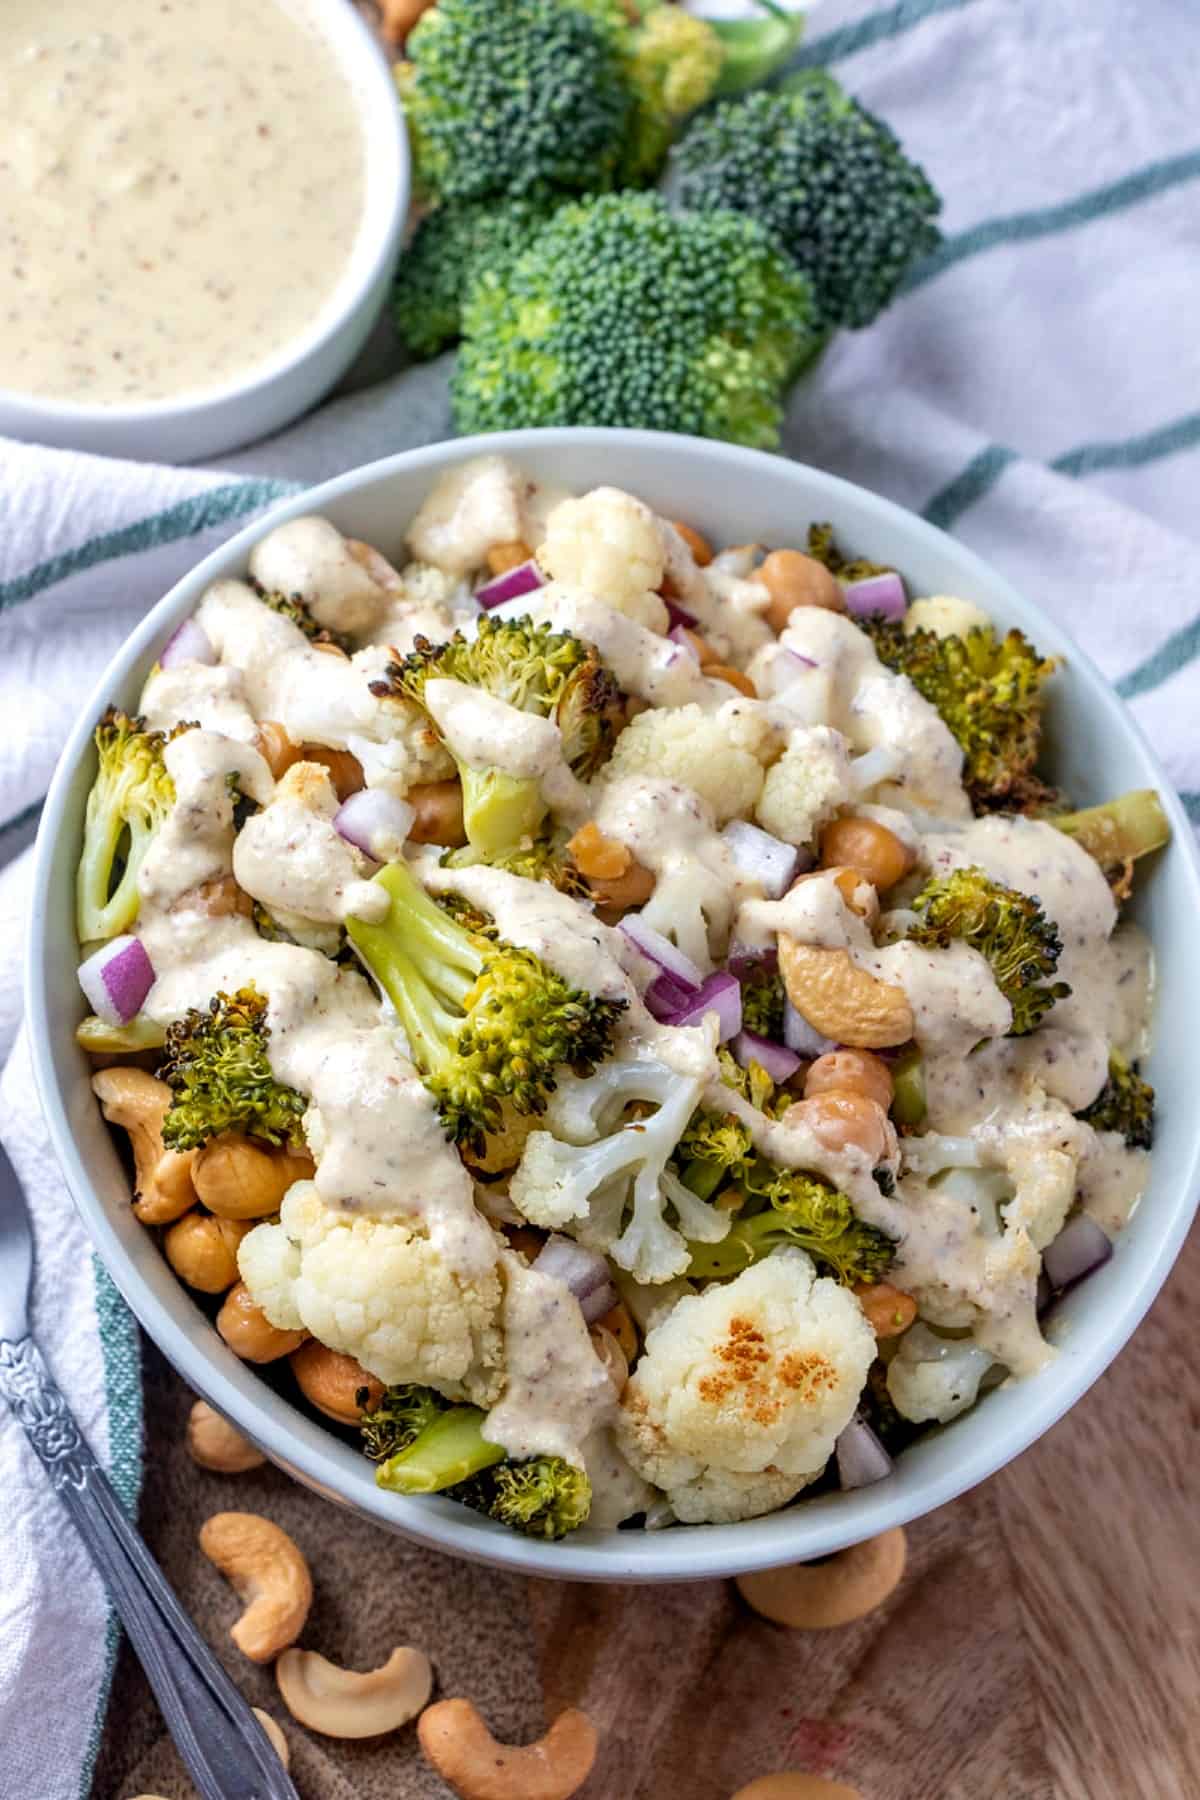 Tilted vegan Buddha bowl full of cauliflower, broccoli, chickpeas and cashews topped with a creamy sauce.